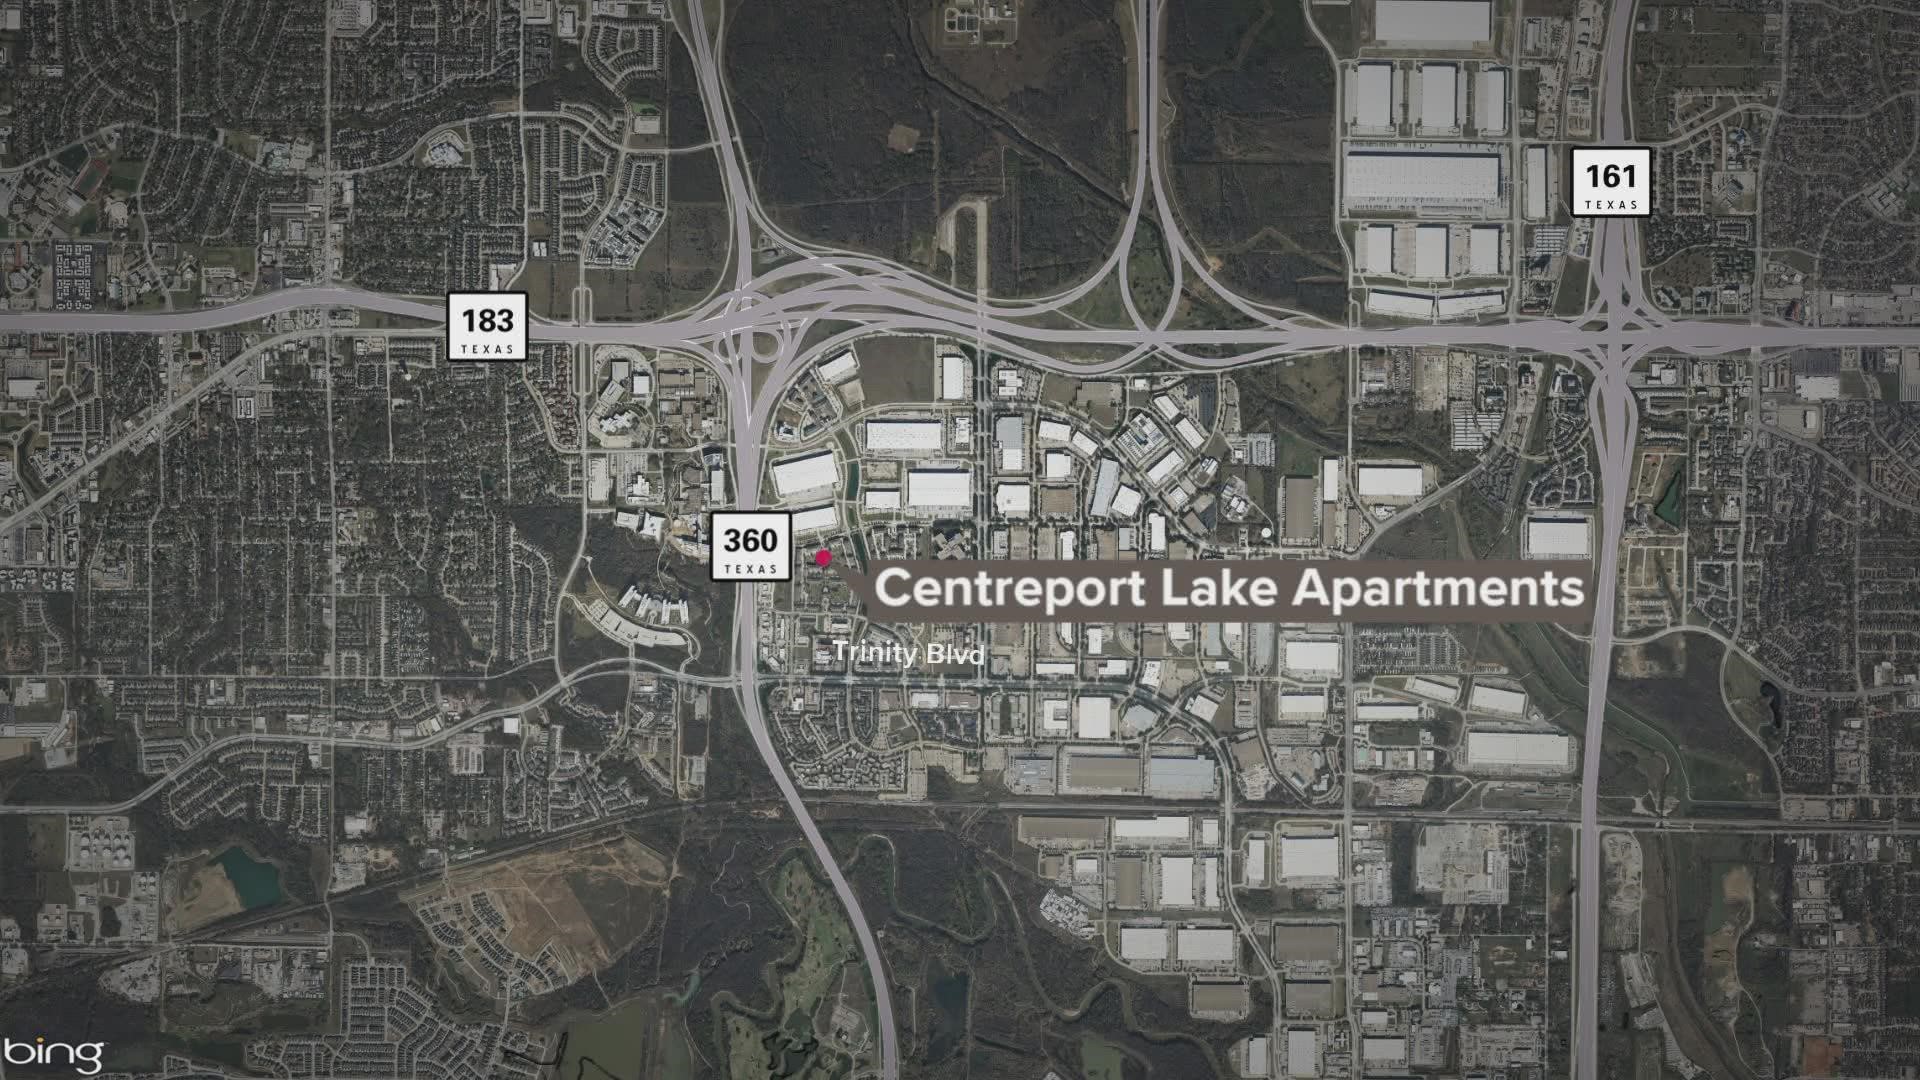 Police say the incident happened at the Centreport Lake apartments near Trinity Boulevard and Highway 360.